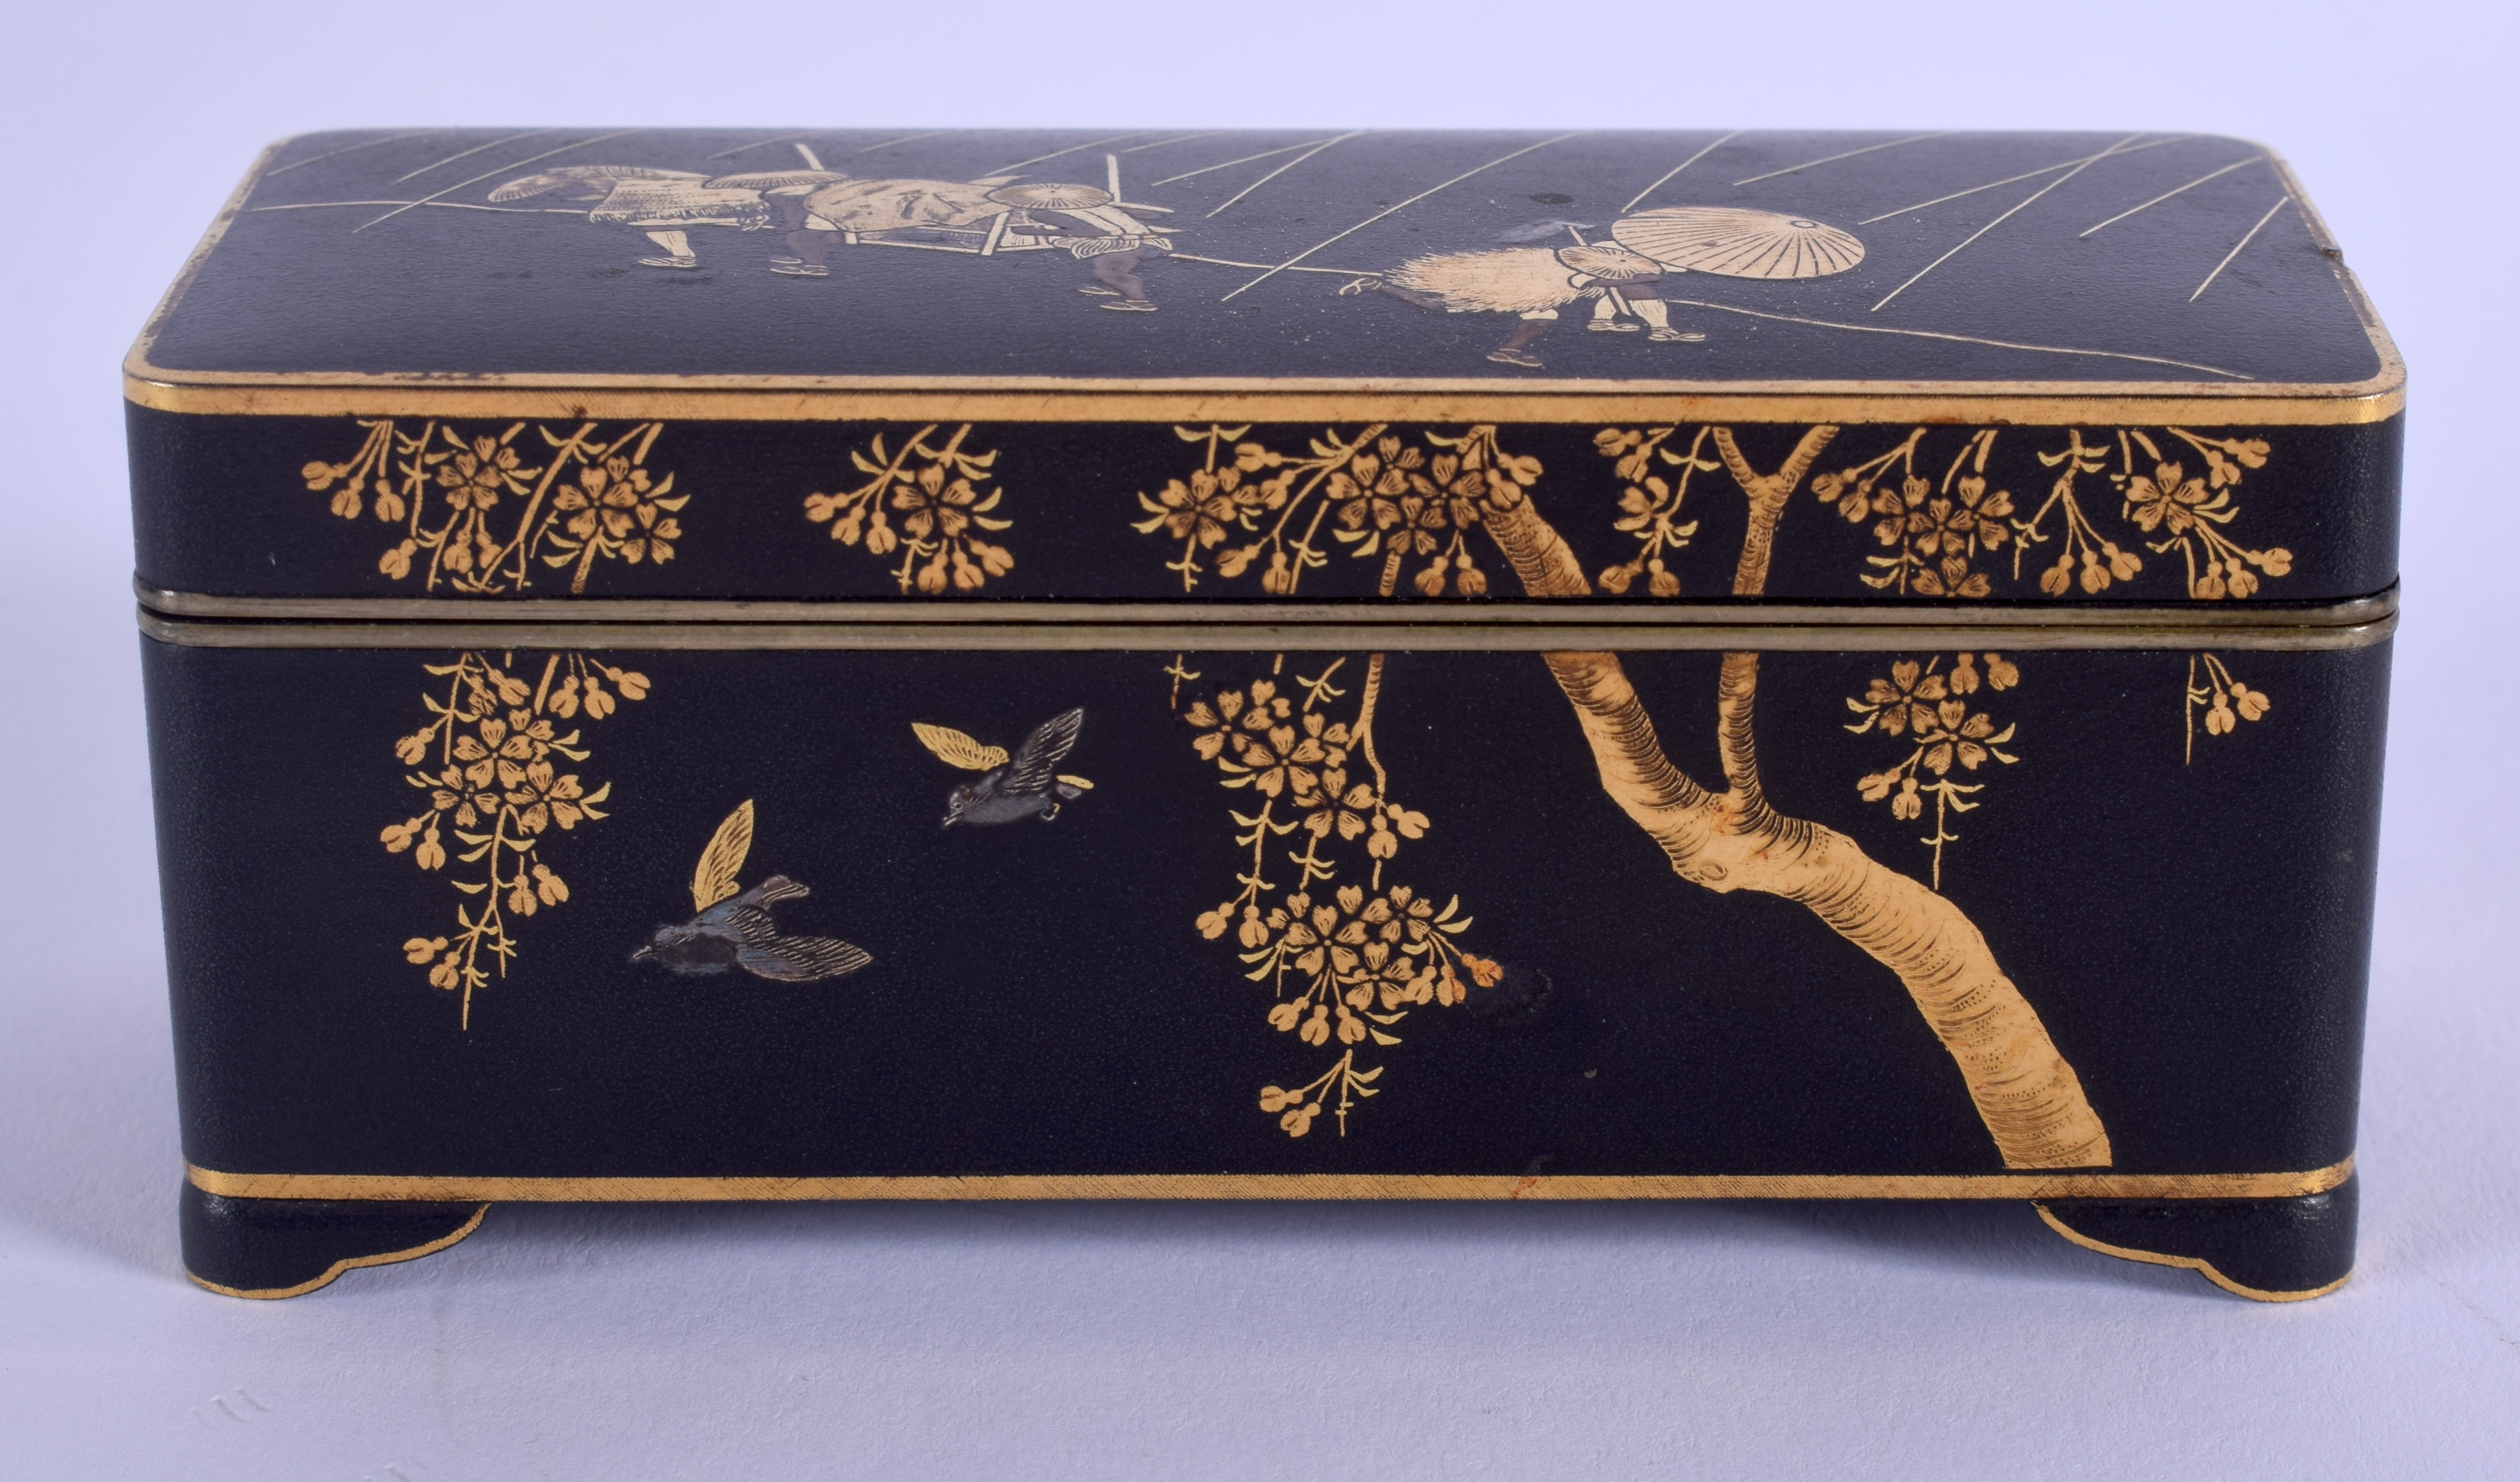 A LOVELY 19TH CENTURY JAPANESE MEIJI PERIOD KOMAI STYLE BOX AND COVER decorated in gold inlay with f - Image 2 of 10